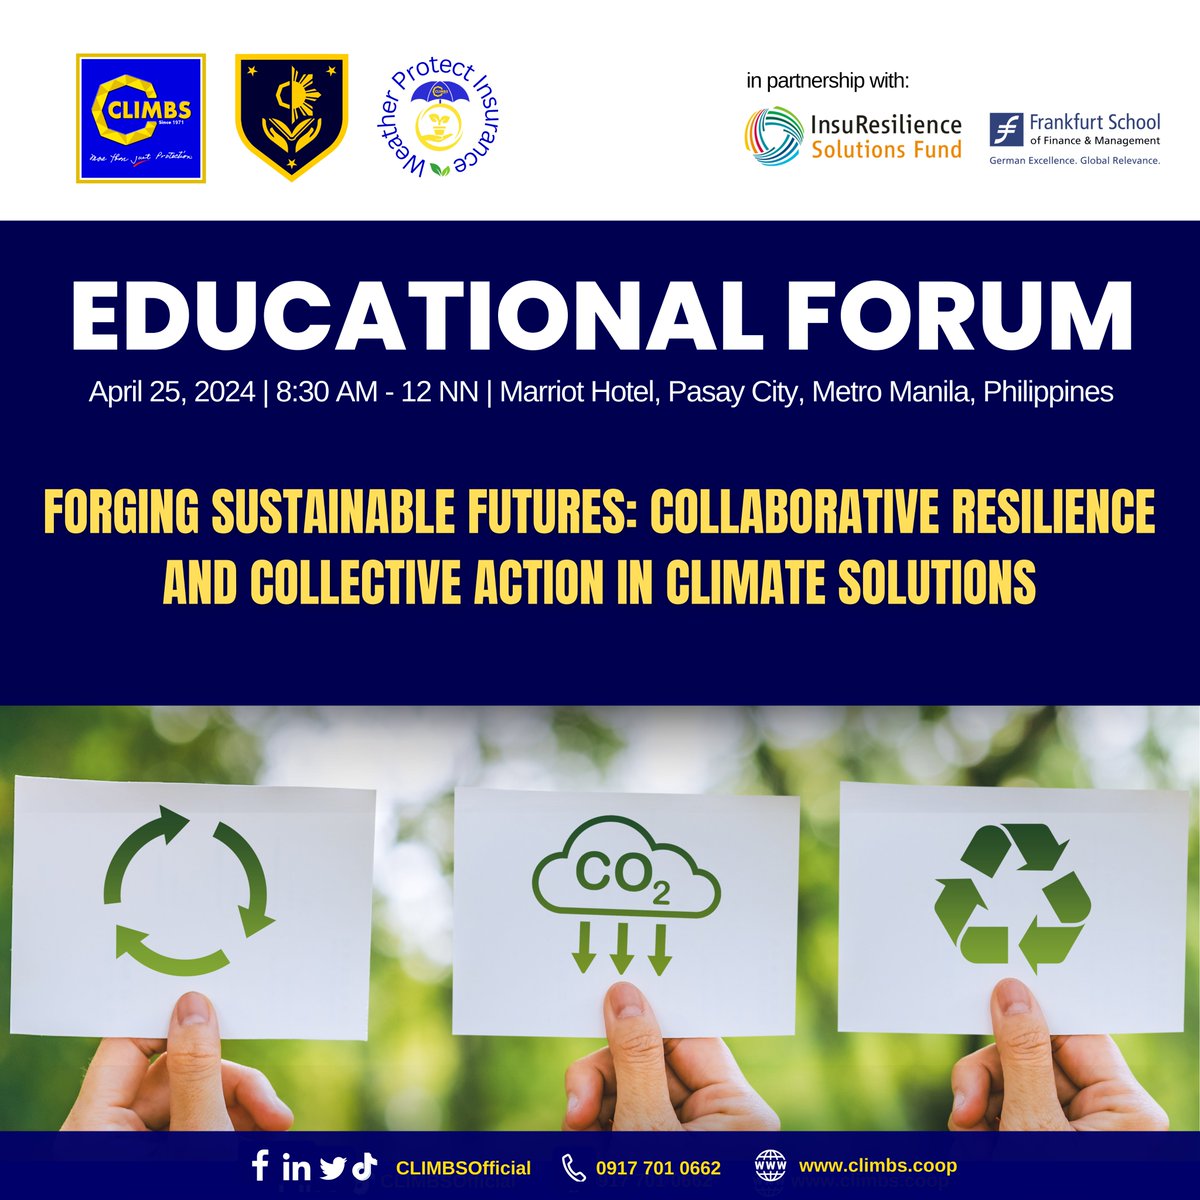 Mark your calendars! CLIMBS Life and General Insurance Cooperative holds its Educational Forum alongside its 52nd Annual General Assembly on April 25, 2024 from 9AM to 12NN at the Manila Marriott Hotel, Pasay City, Philippines.